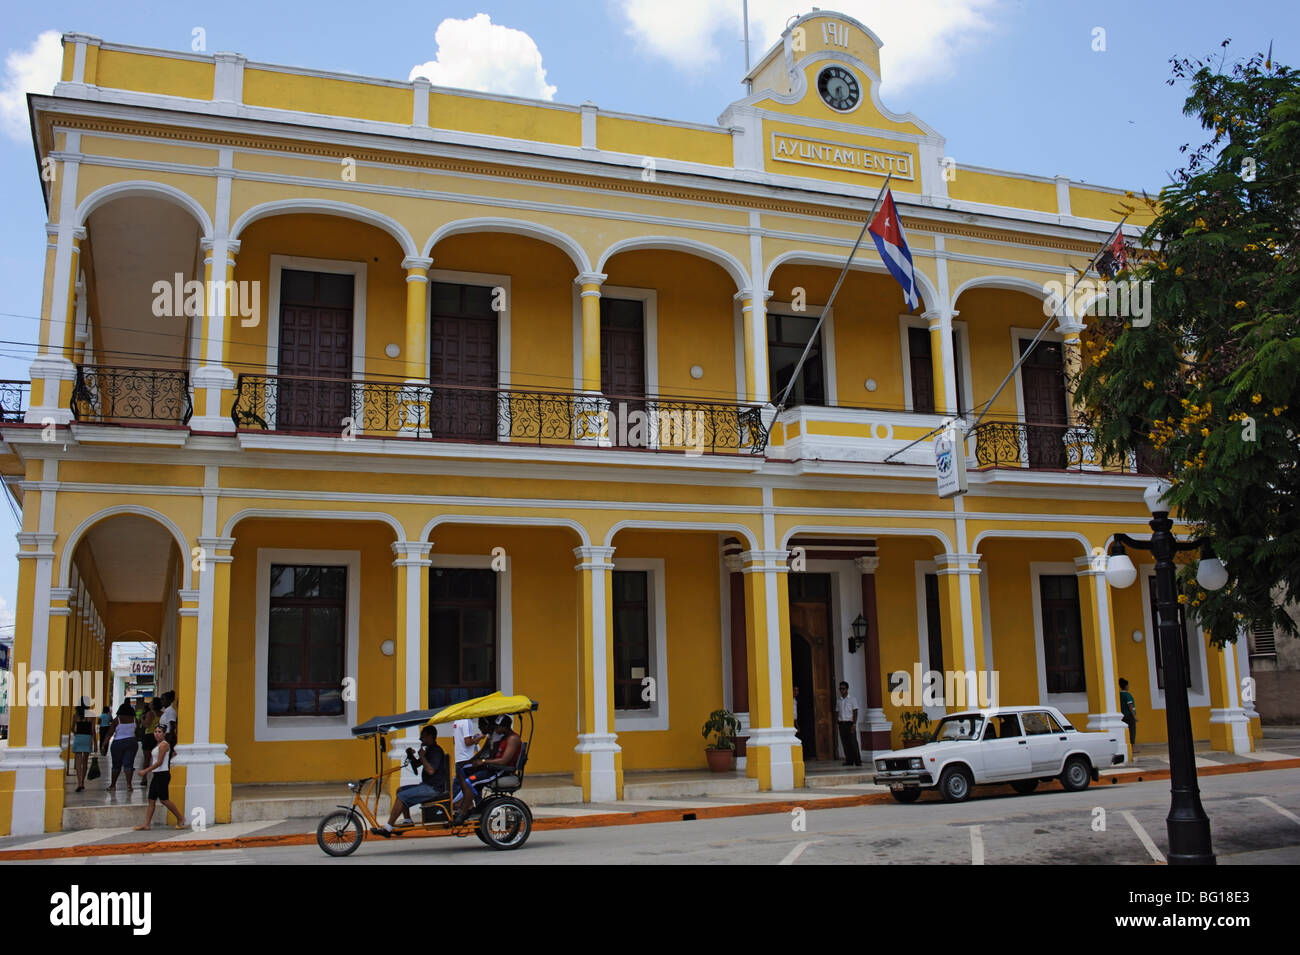 A bici-taxi (bicycle rickshaw) and Russian Lada car in front of Council House, Marti Square, Ciego de Cvila, Cuba, West Indies Stock Photo